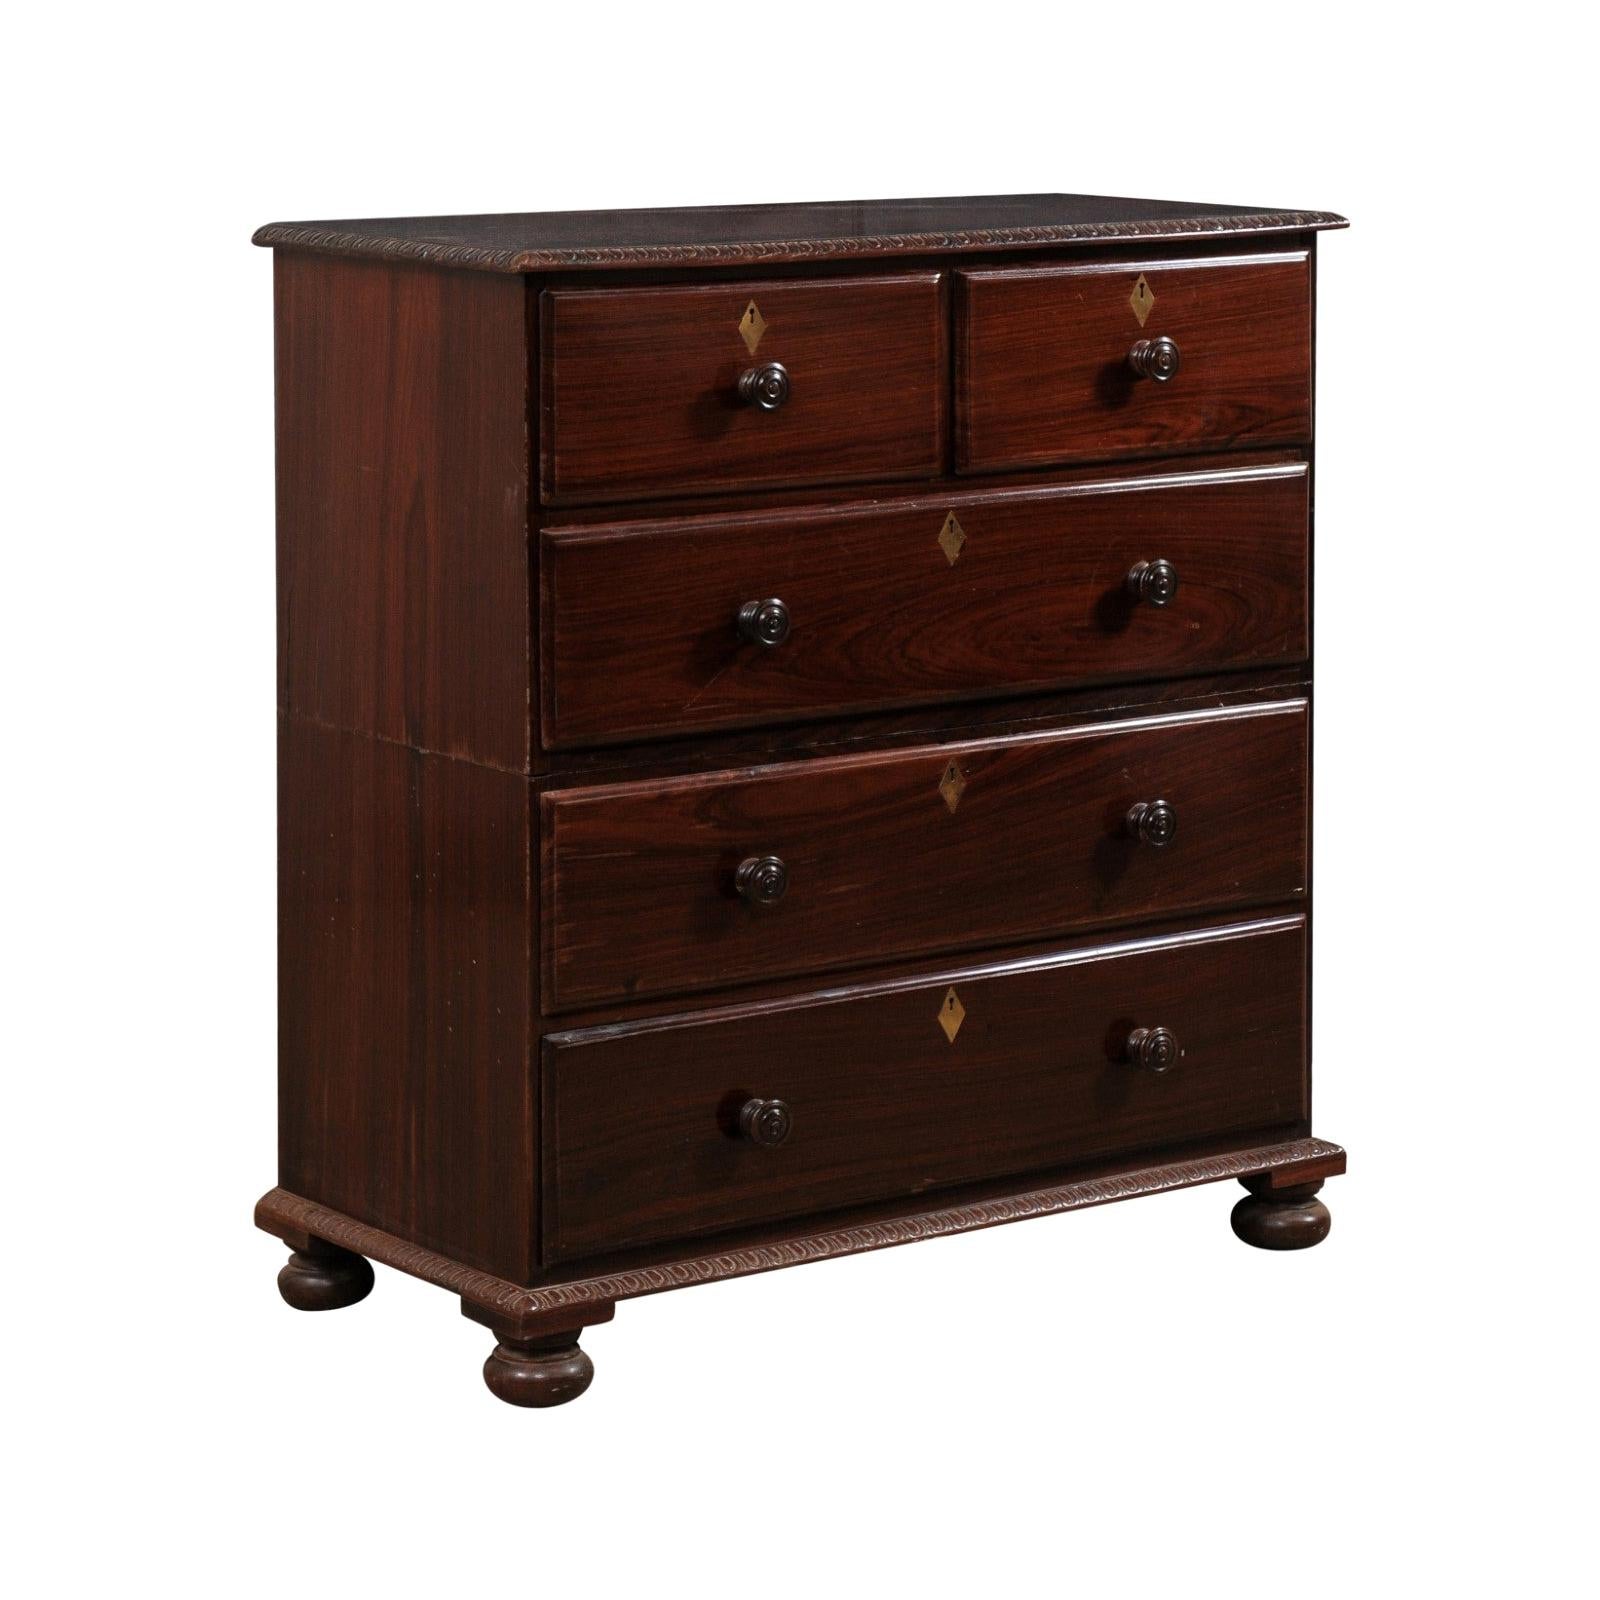 British Colonial Rosewood Chest of Drawers w/ Egg-n-Dart Trim, Early 20th C For Sale